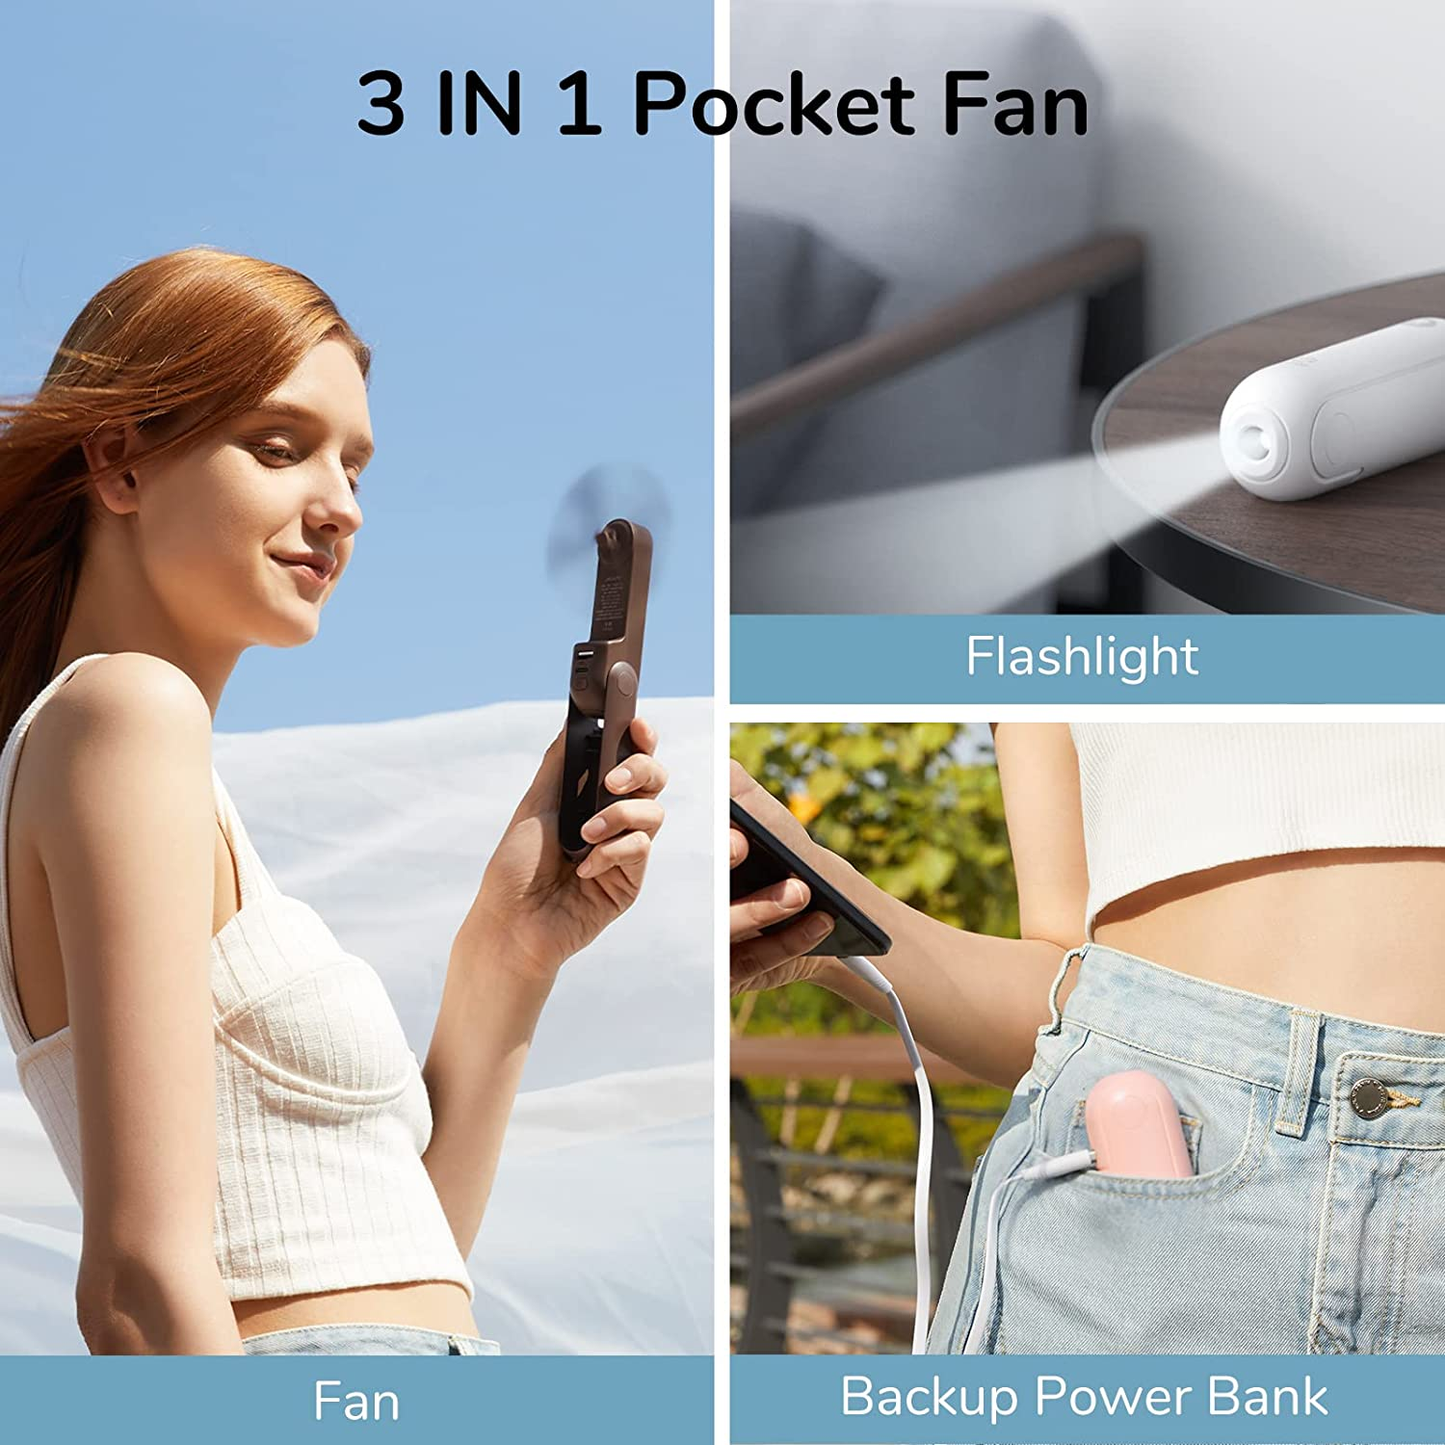 Handheld Mini Fan, 3 in 1 Hand Fan, Portable USB Rechargeable Small Pocket Fan, Battery Operated Fan [14-21 Working Hours] with Power Bank, Flashlight Feature for Women,Travel,Outdoor-Brown